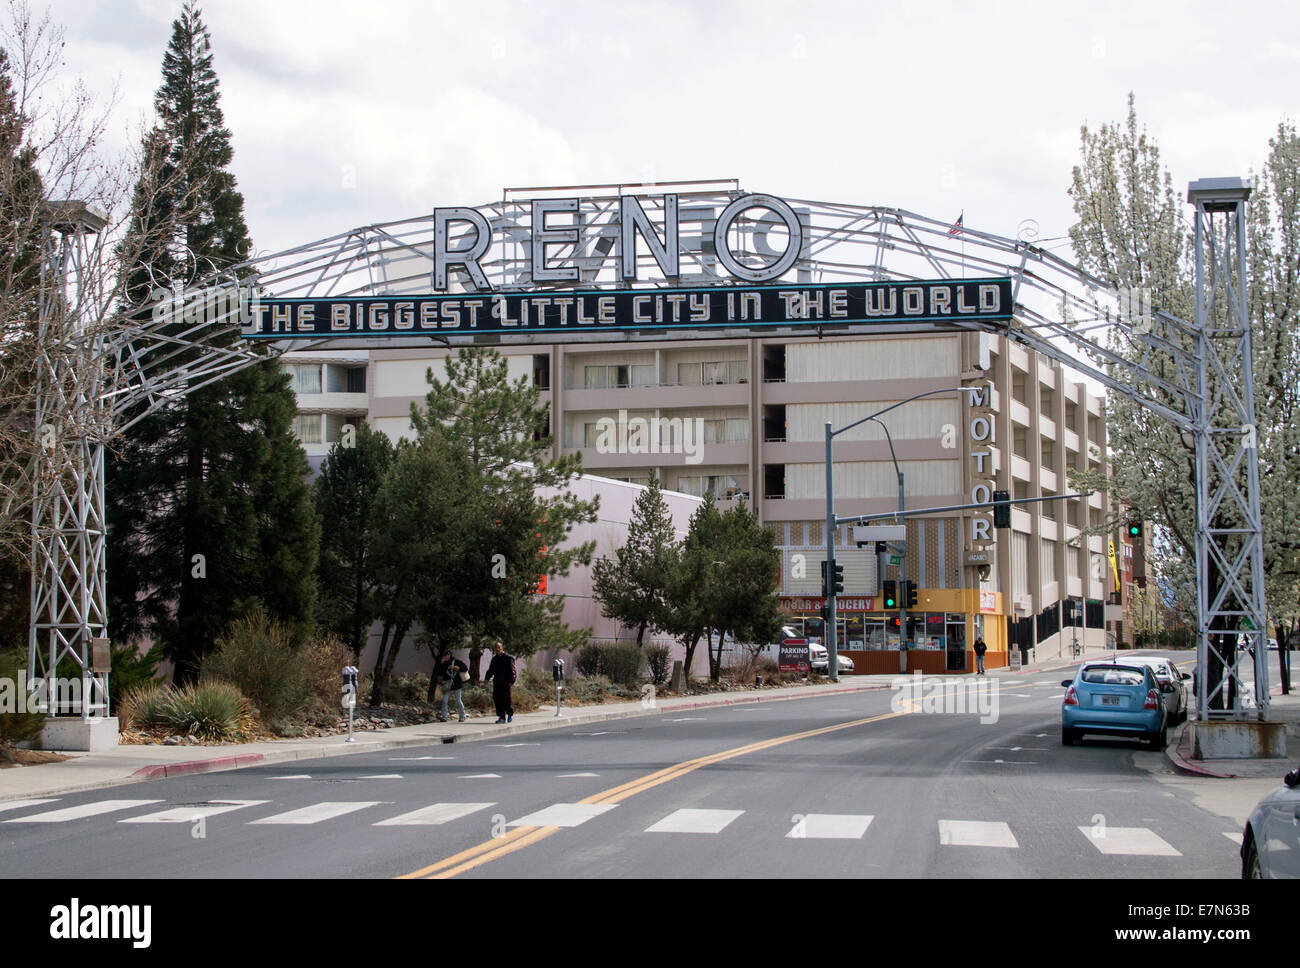 The Biggest Little City in the World sign in Reno Nevada Stock Photo